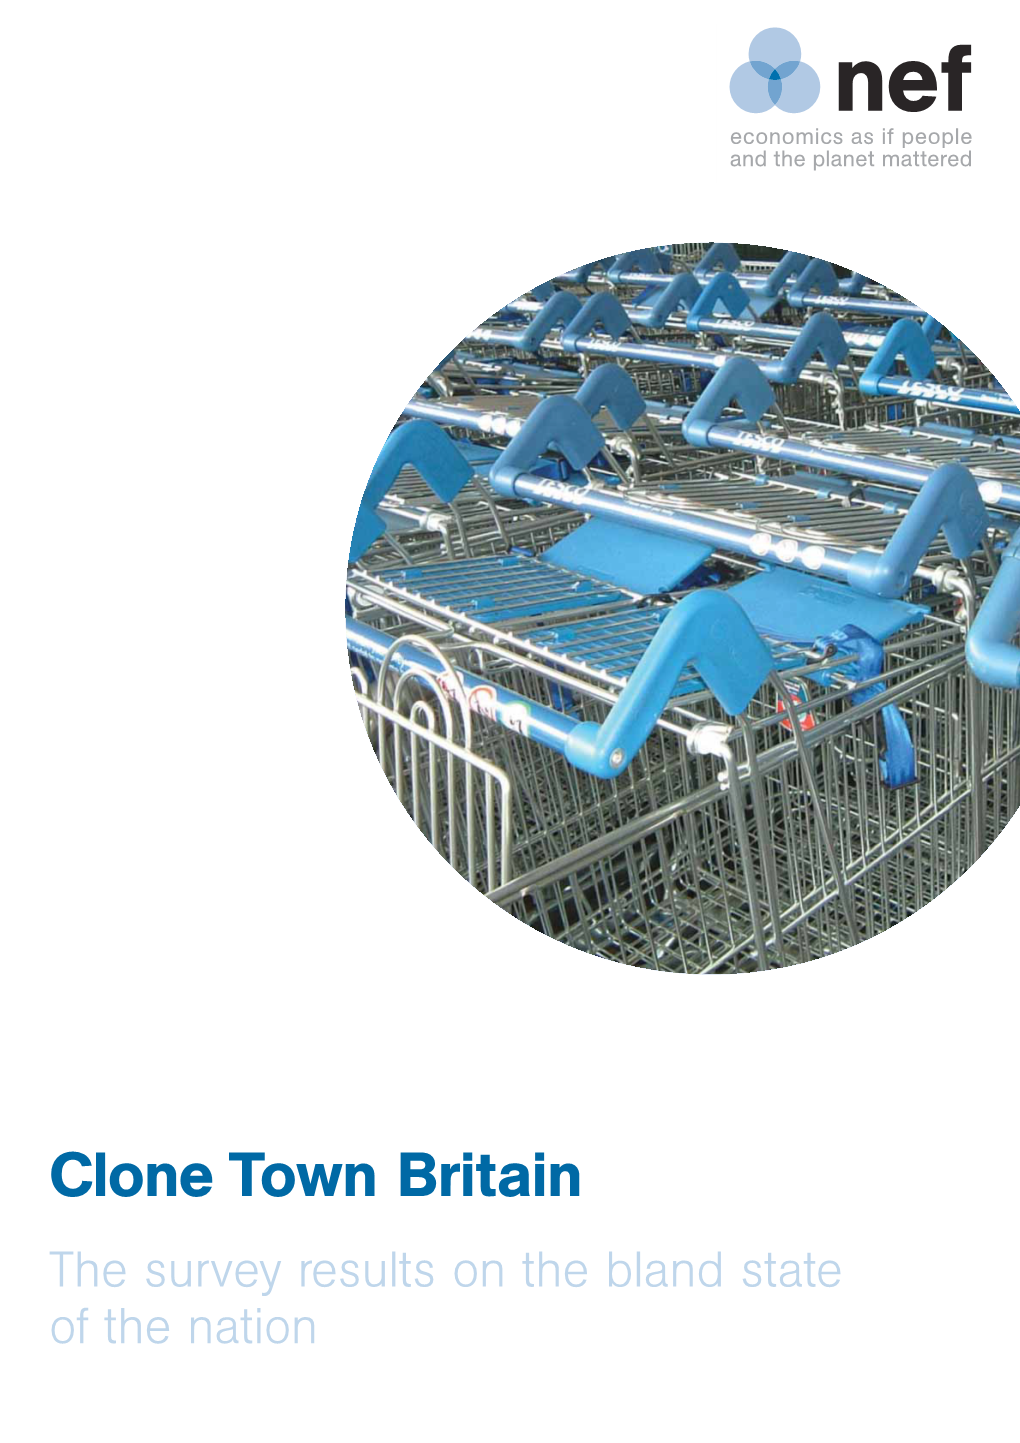 Clone Town Britain the Survey Results on the Bland State of the Nation Nef Is an Independent Think-And-Do Tank That Inspires and Demonstrates Real Economic Well-Being